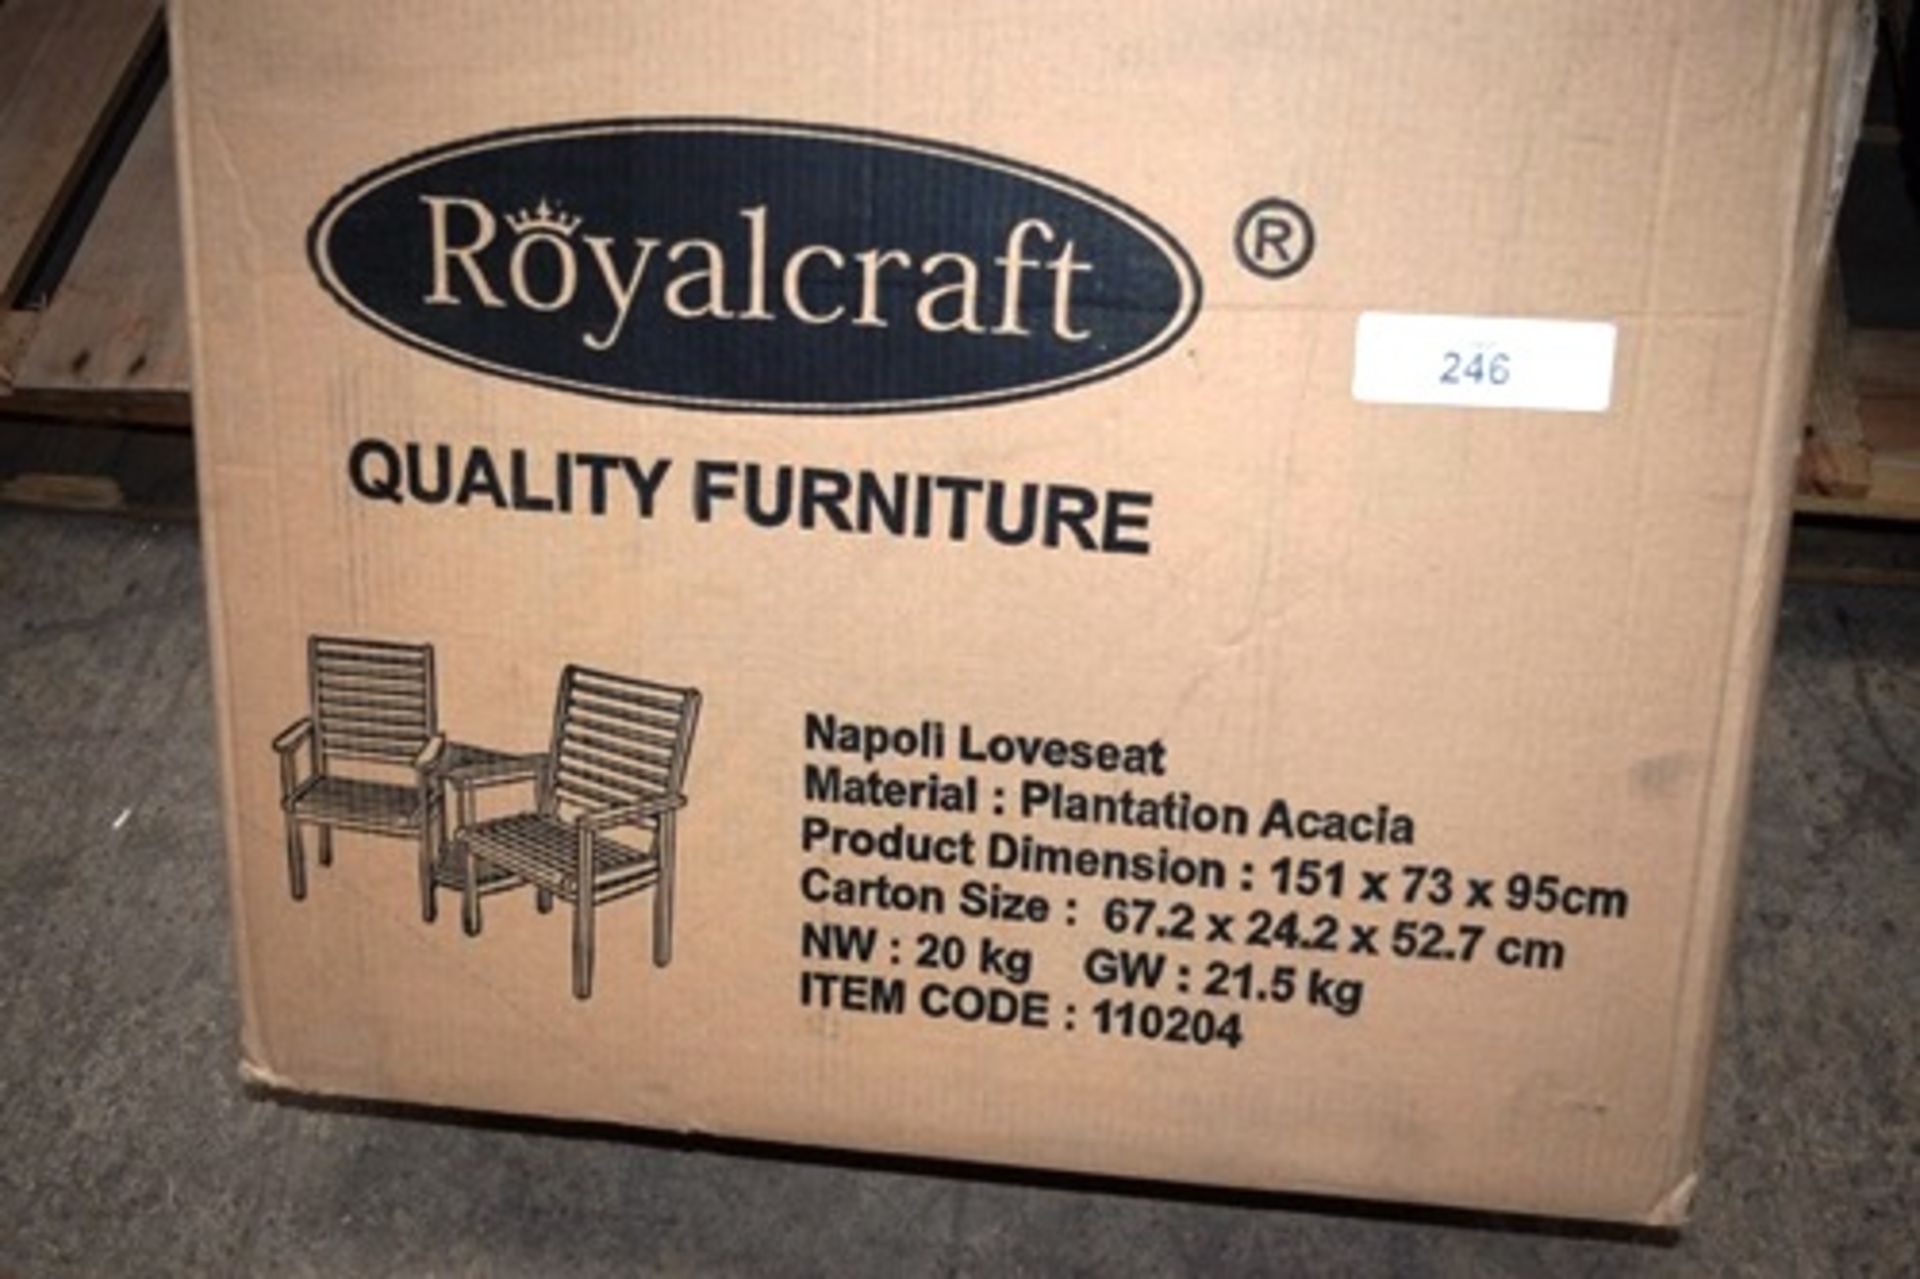 Royalcraft Napoli love seat, weight 20kg, item code 110204 - New (GS51)